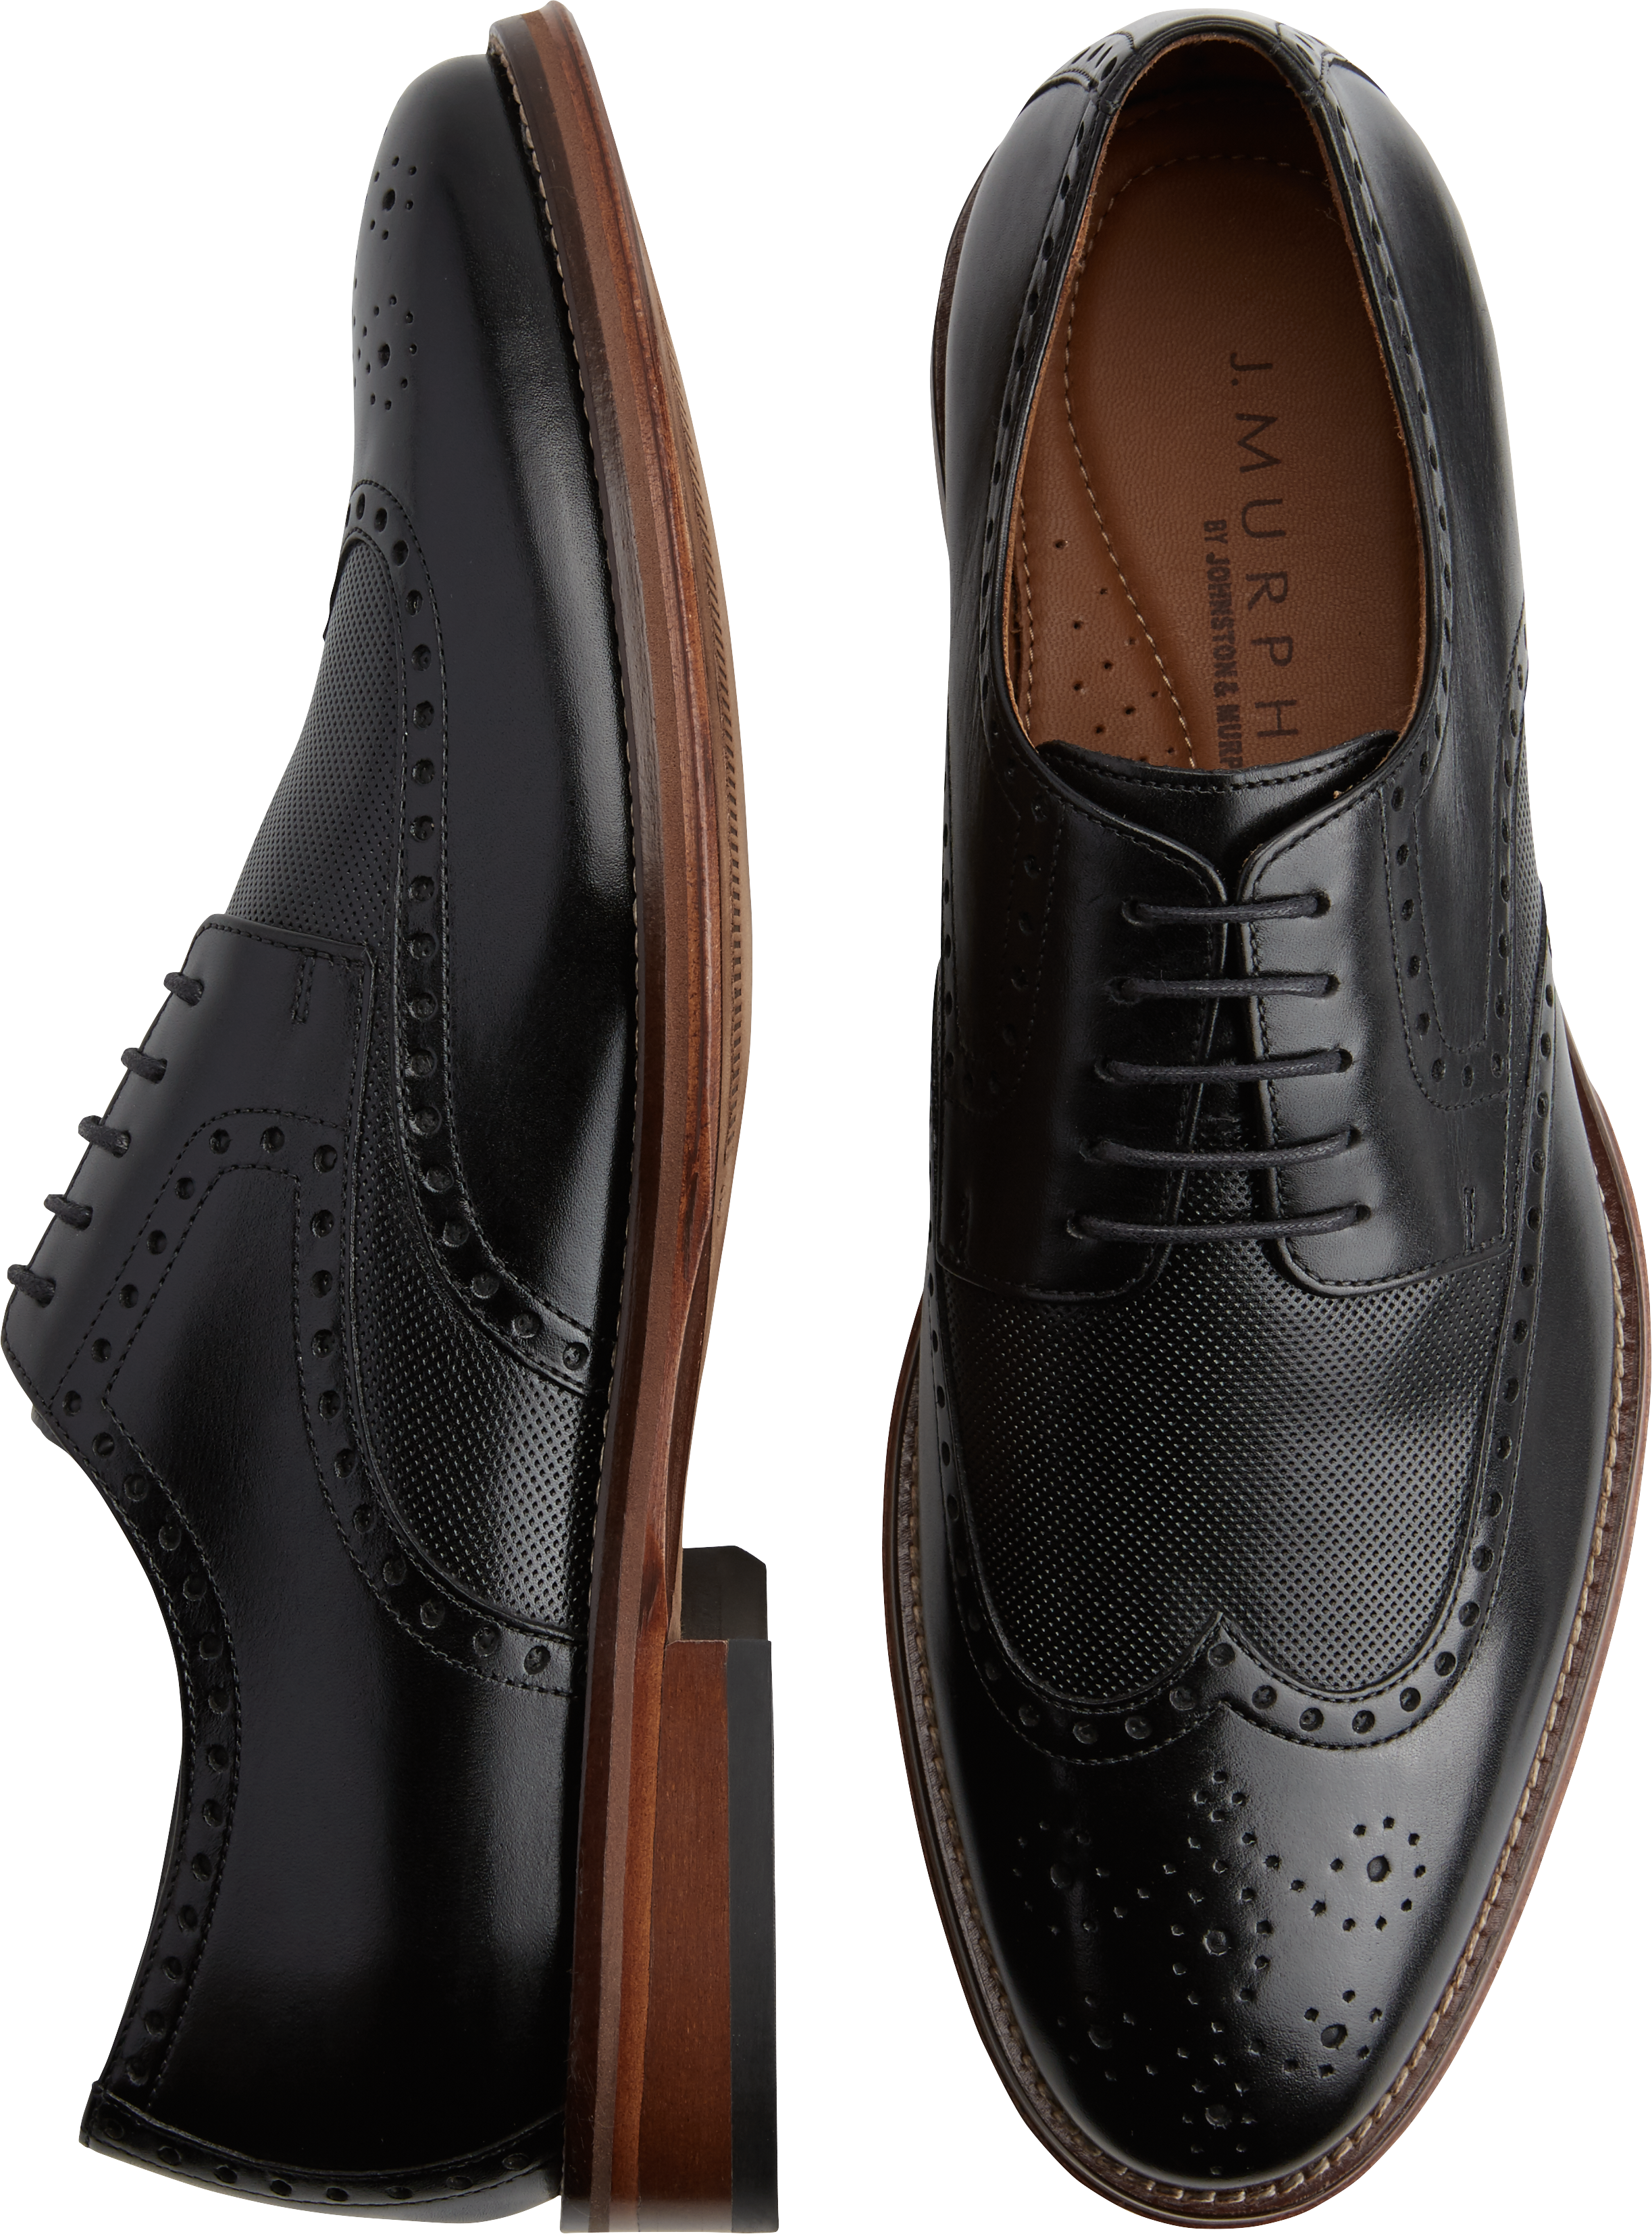 johnston and murphy mens wingtip shoes